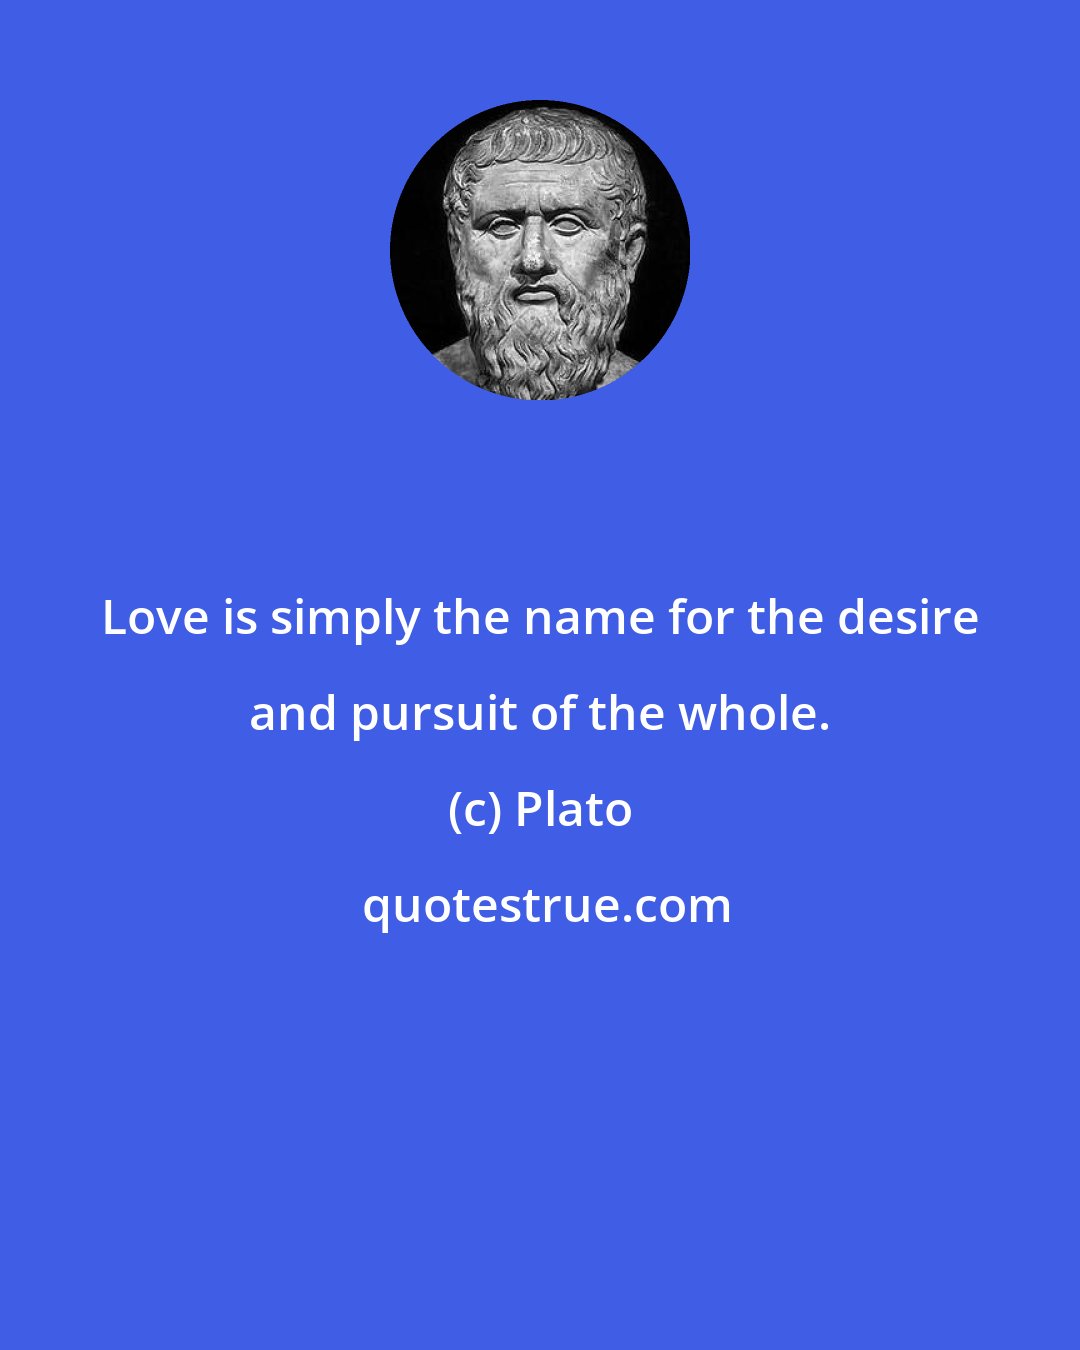 Plato: Love is simply the name for the desire and pursuit of the whole.